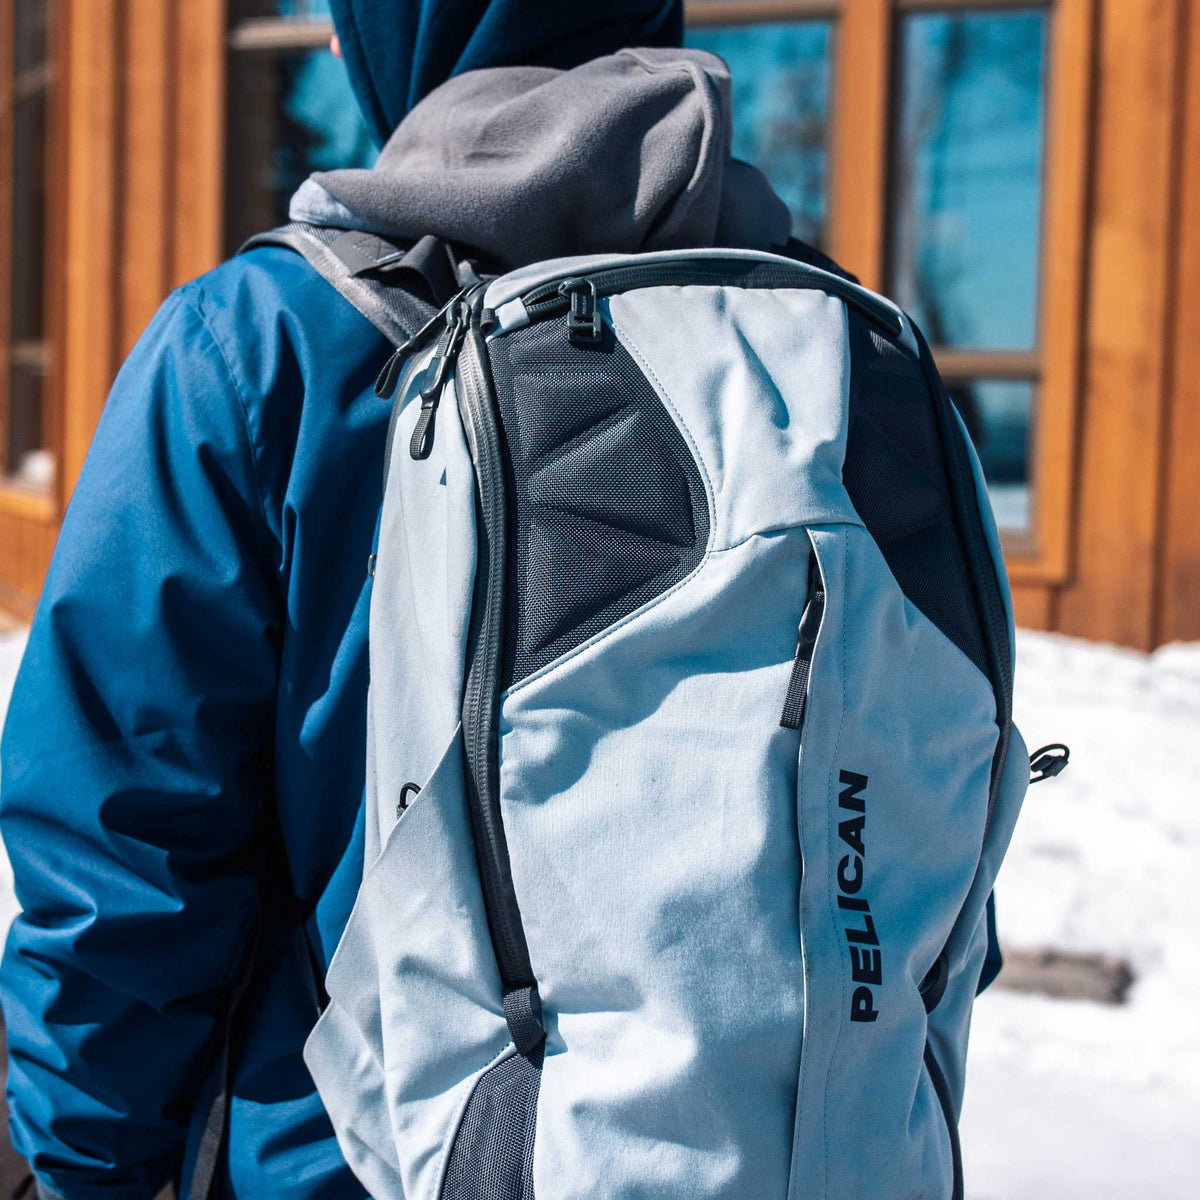 SL-MPB35-GRY Pelican™ MPB35 Backpack being used outside in the snow